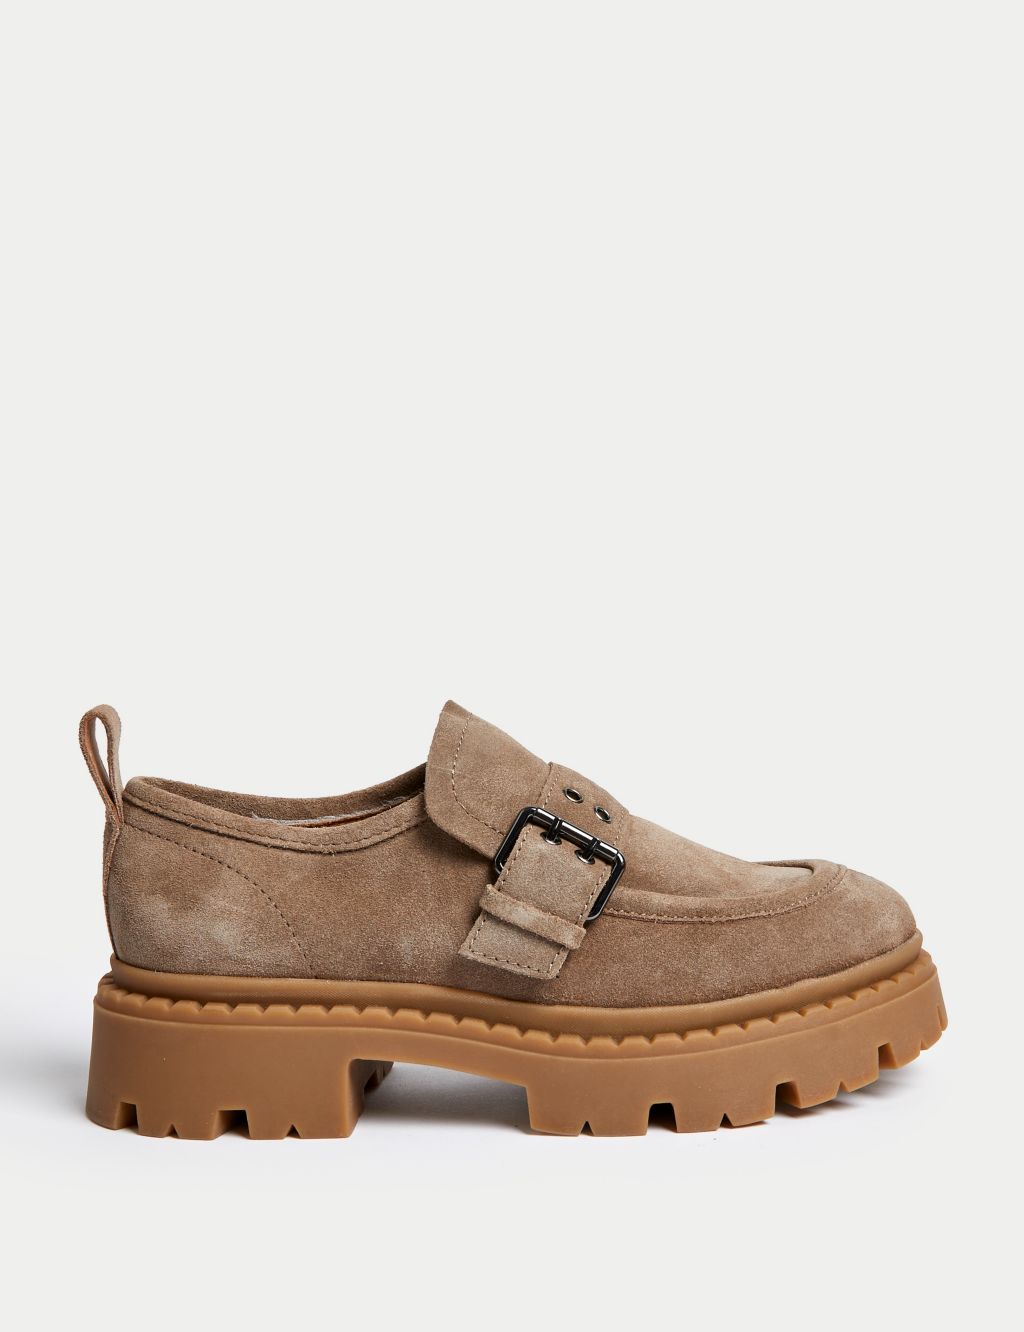 Suede Buckle Chunky Loafers image 1